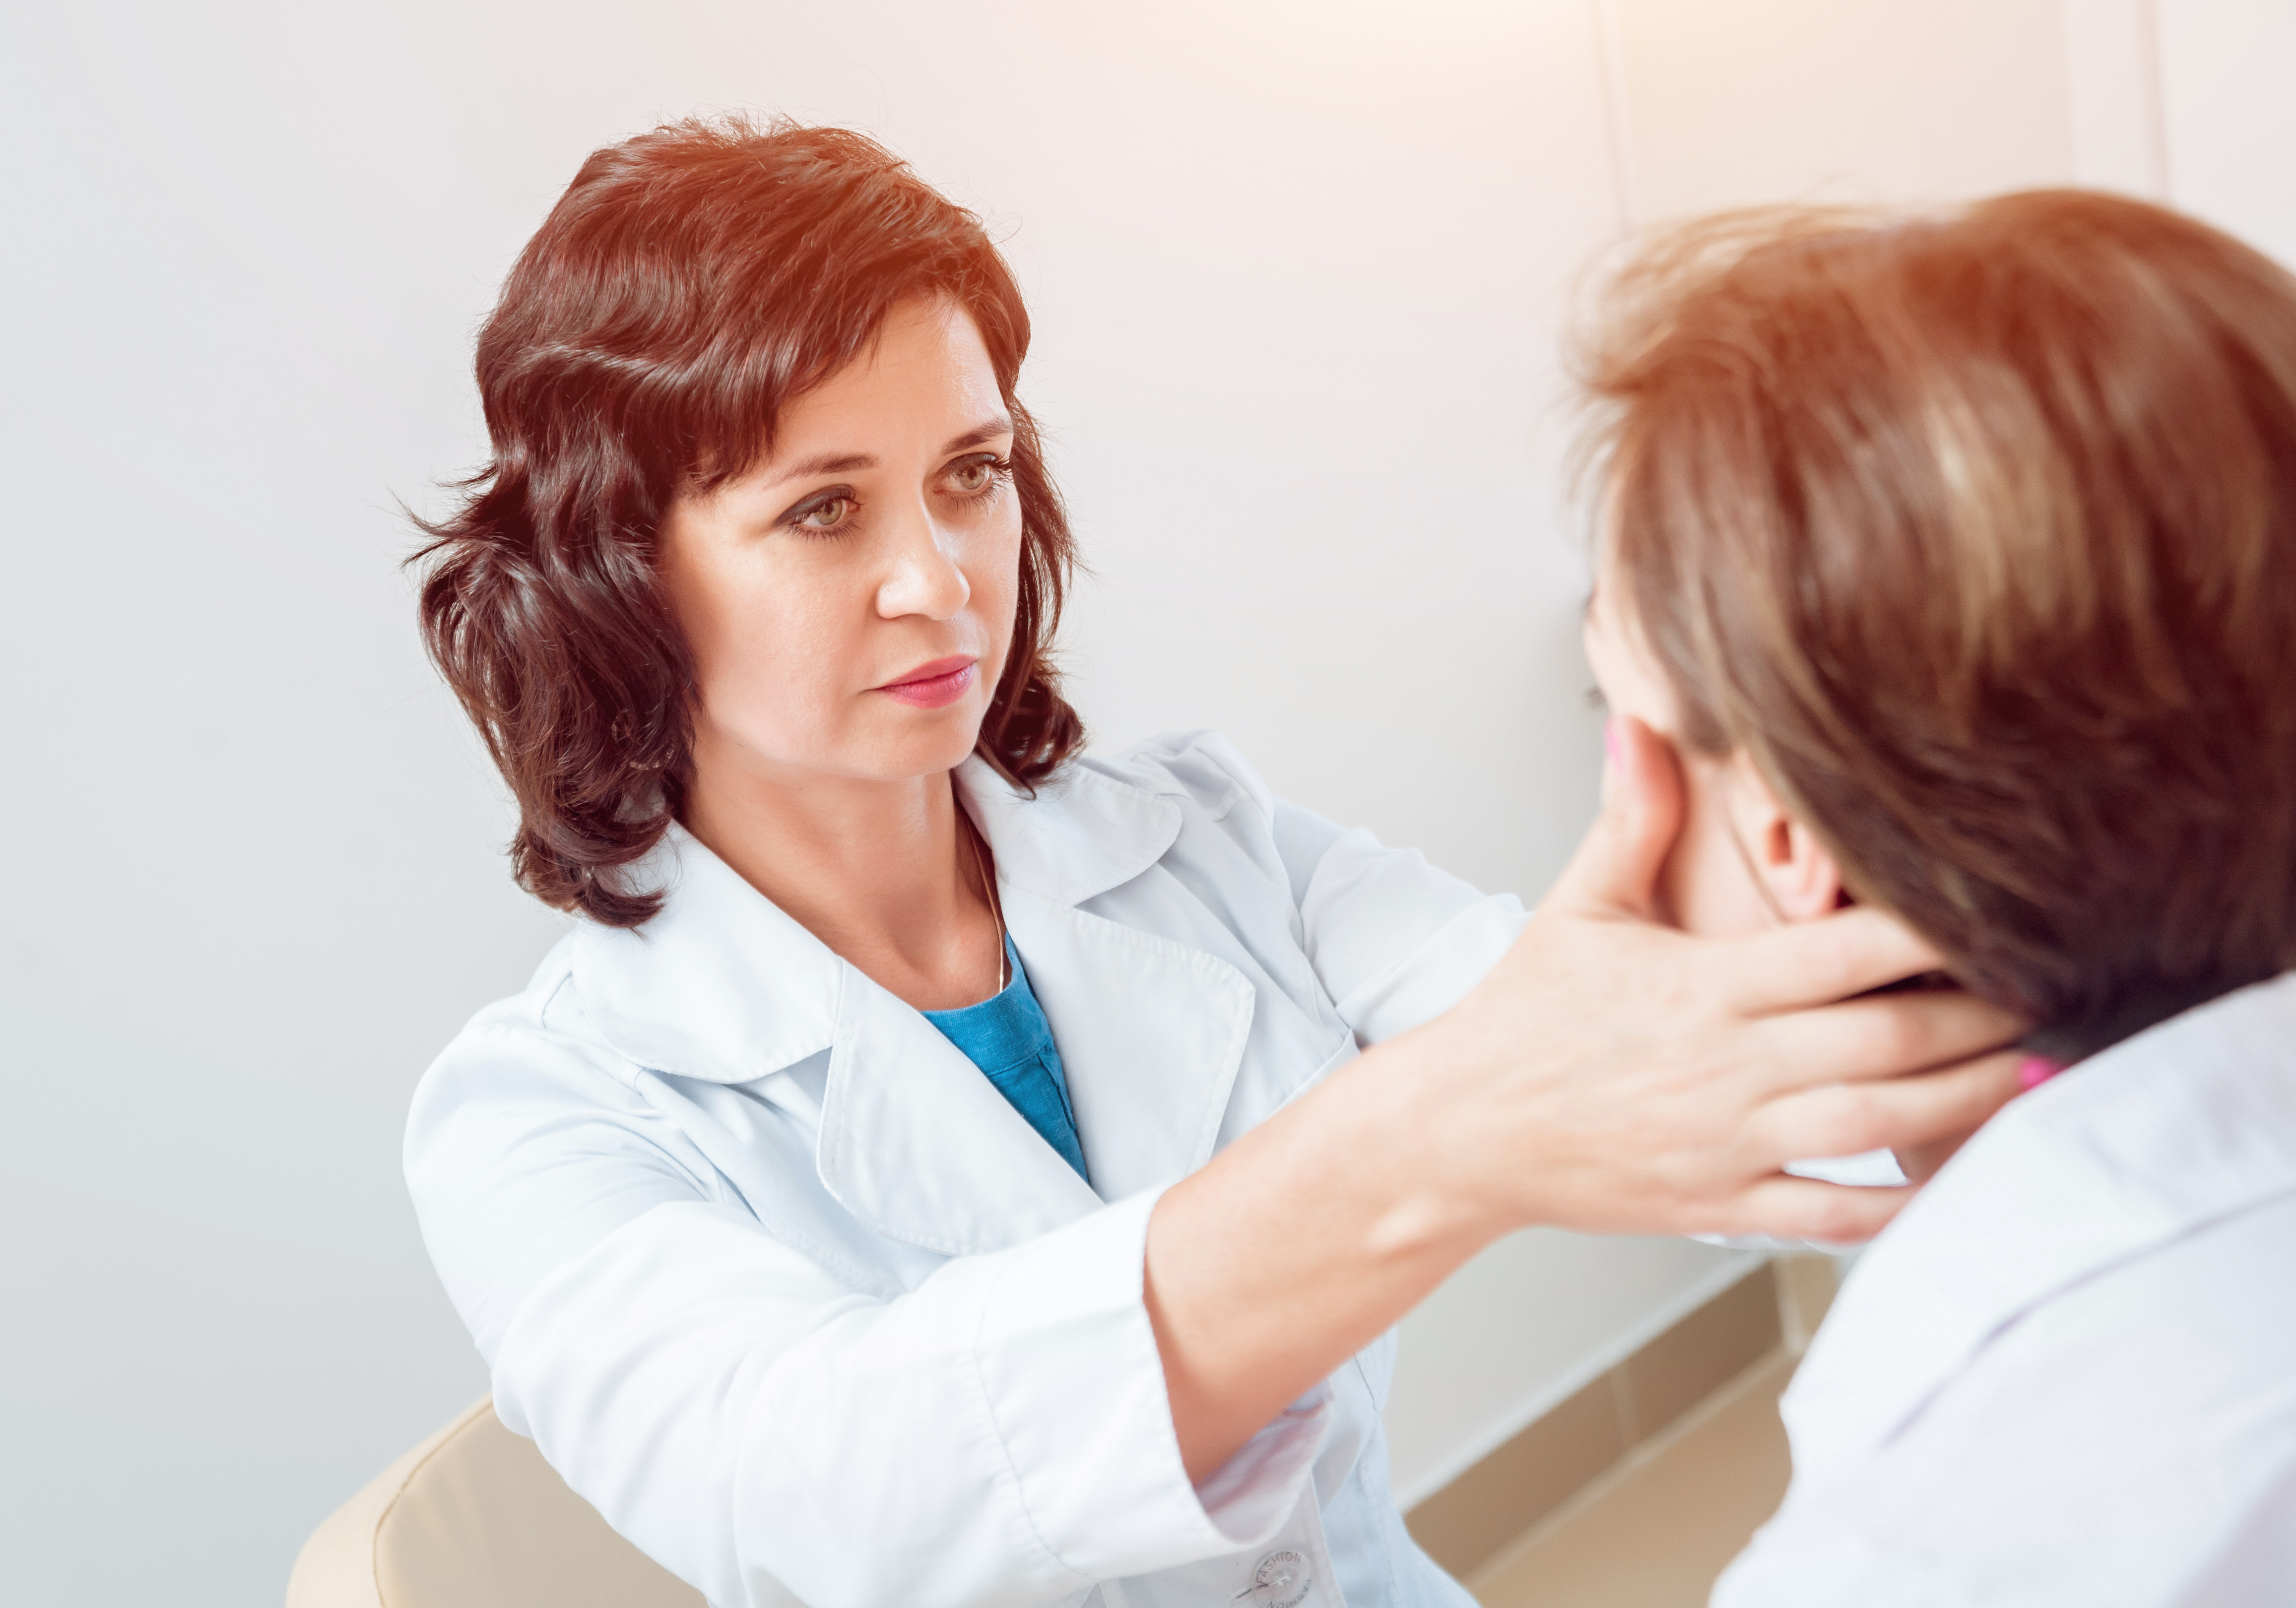 Sudden Temporary Blurry Vision: When to See Doctor